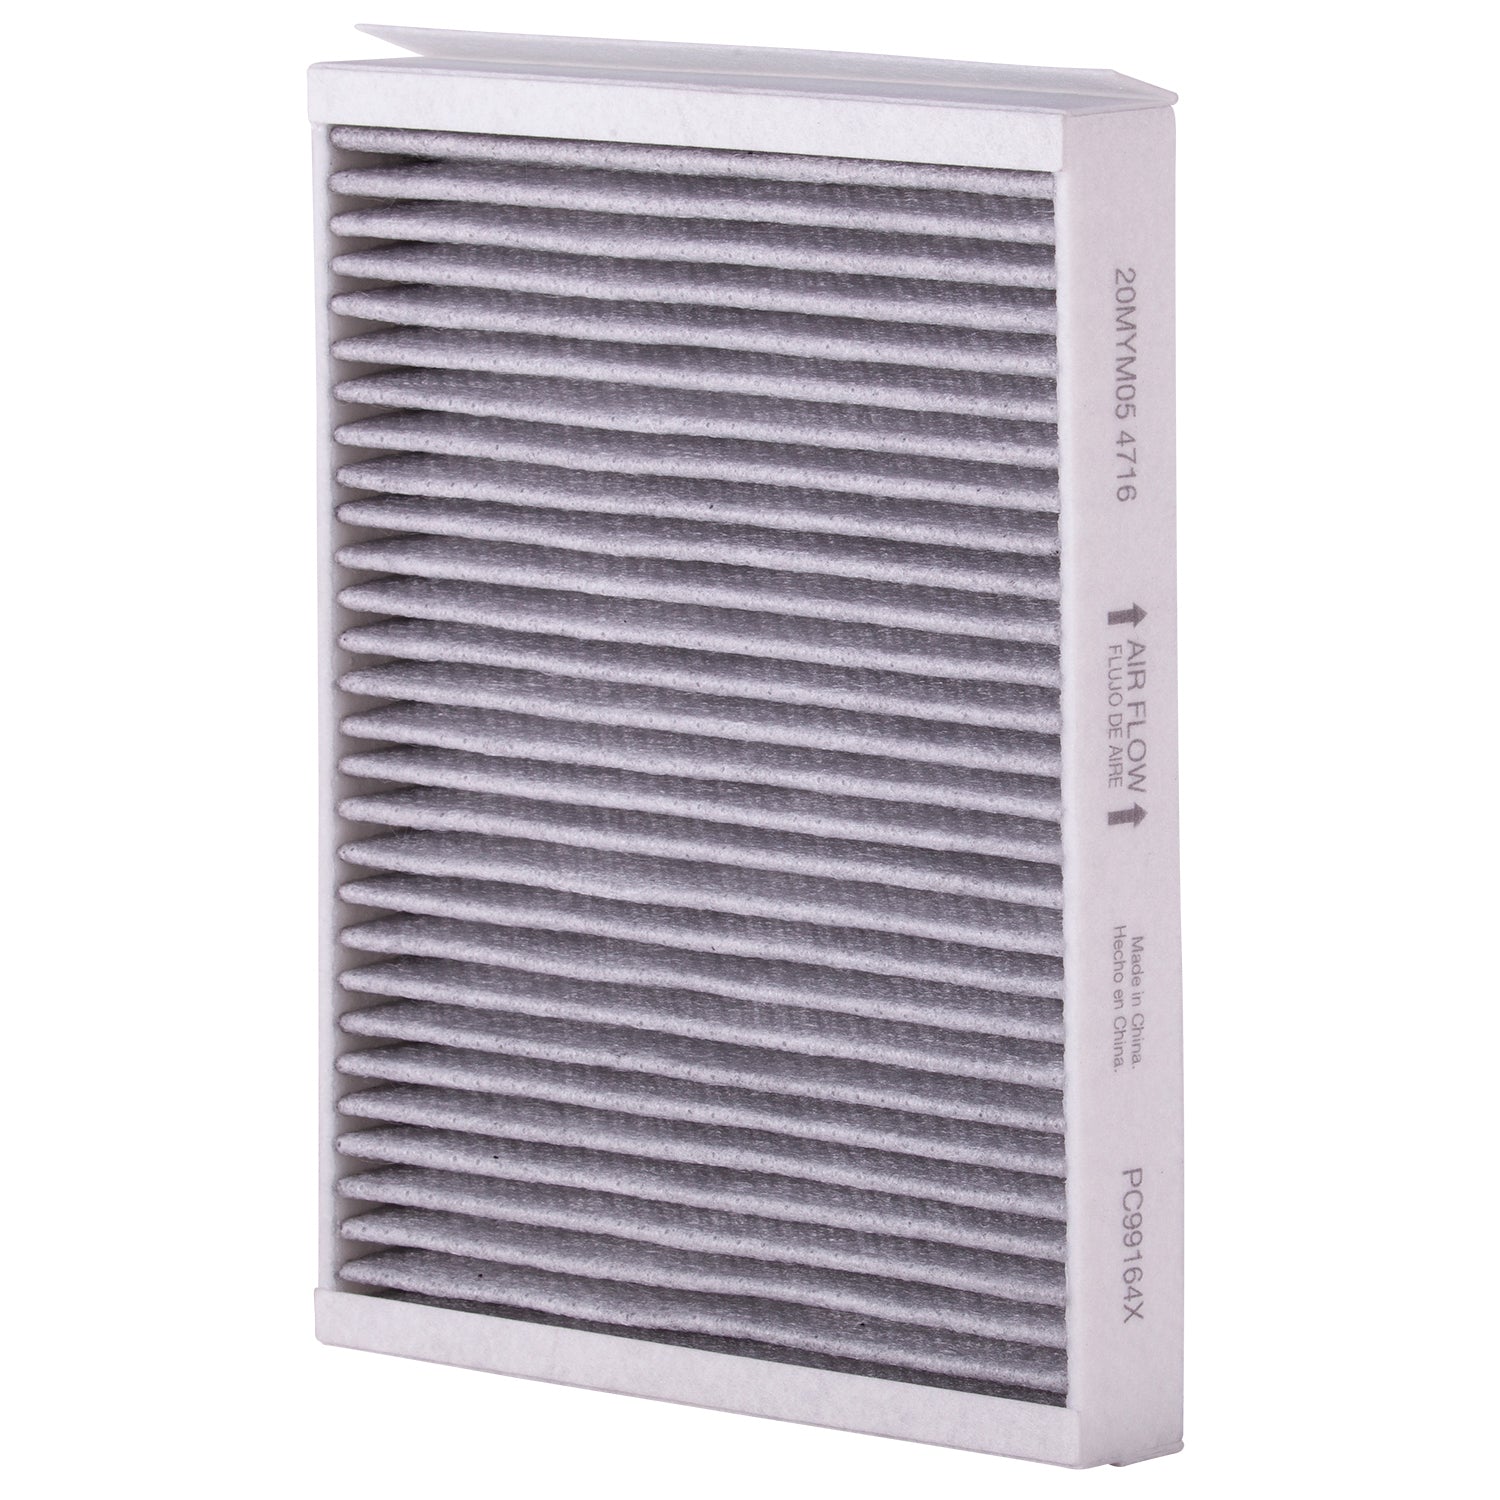 PUREFLOW 2019 Mercedes-Benz GLS550 Cabin Air Filter with Antibacterial Technology, PC99164X